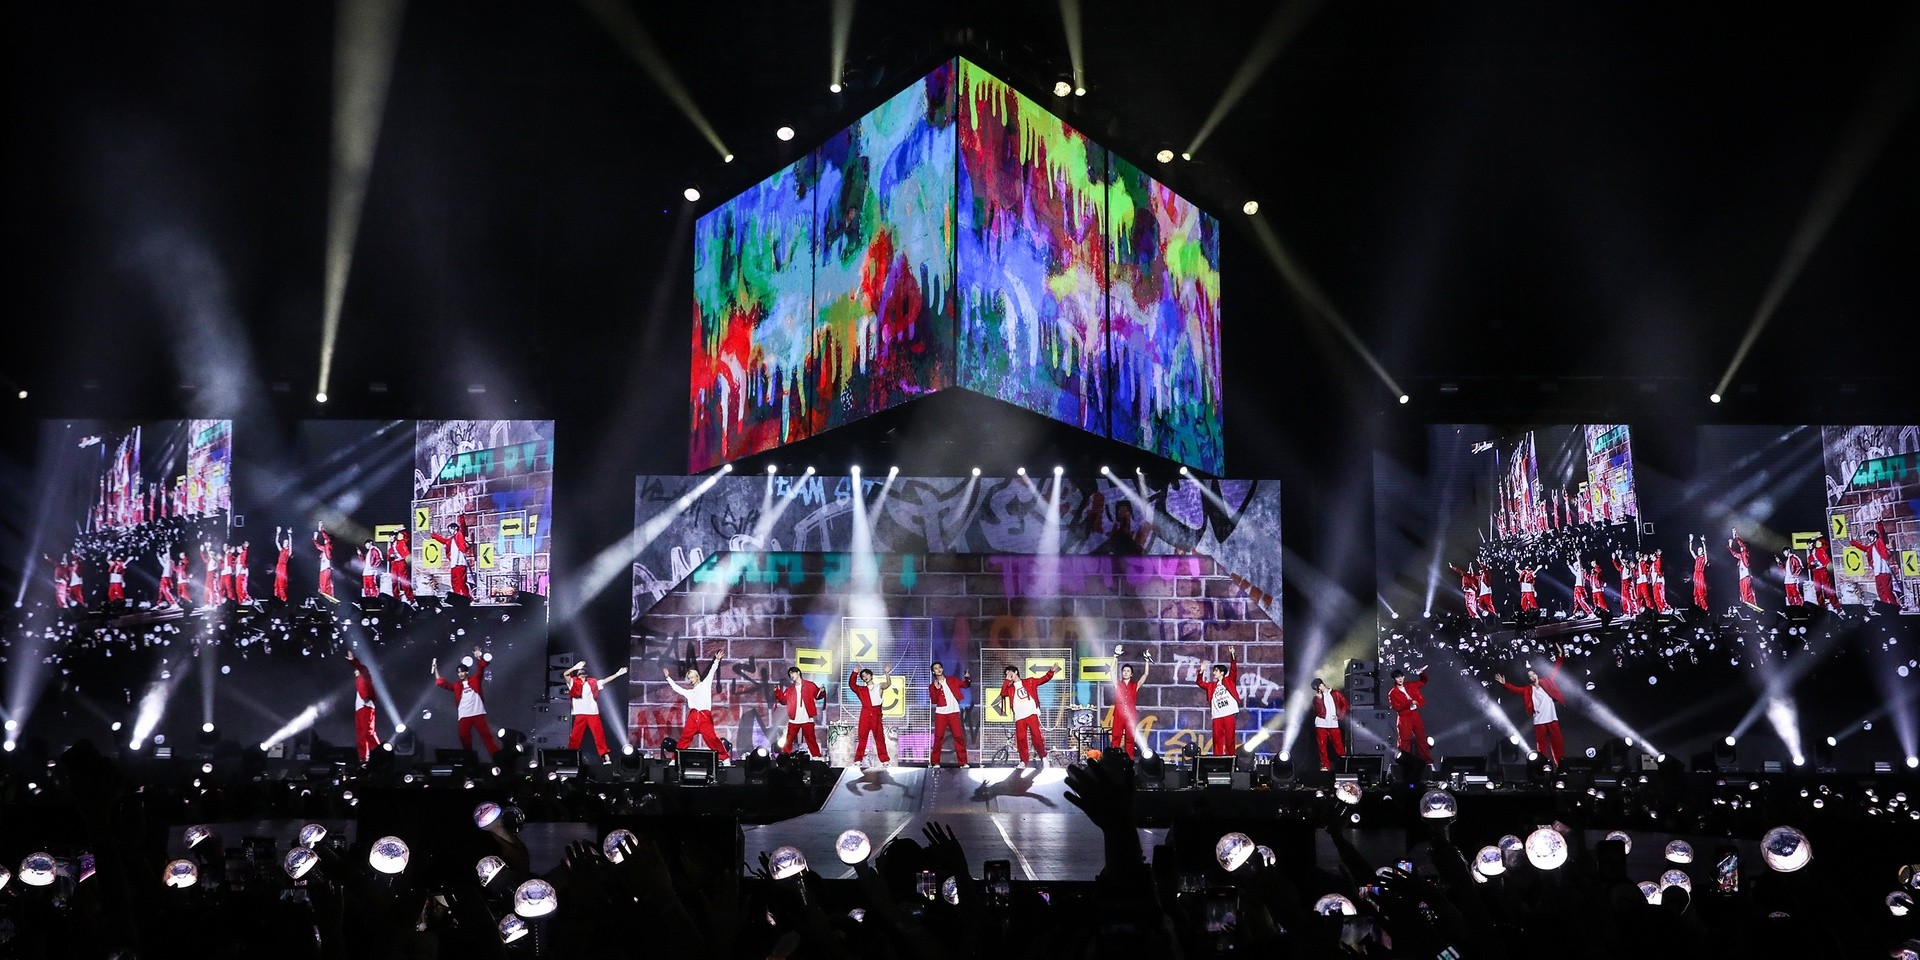 SEVENTEEN dare to dream at history-making Philippine Arena show: ‘We'll come back with a bigger, better stage next time’ – gig report